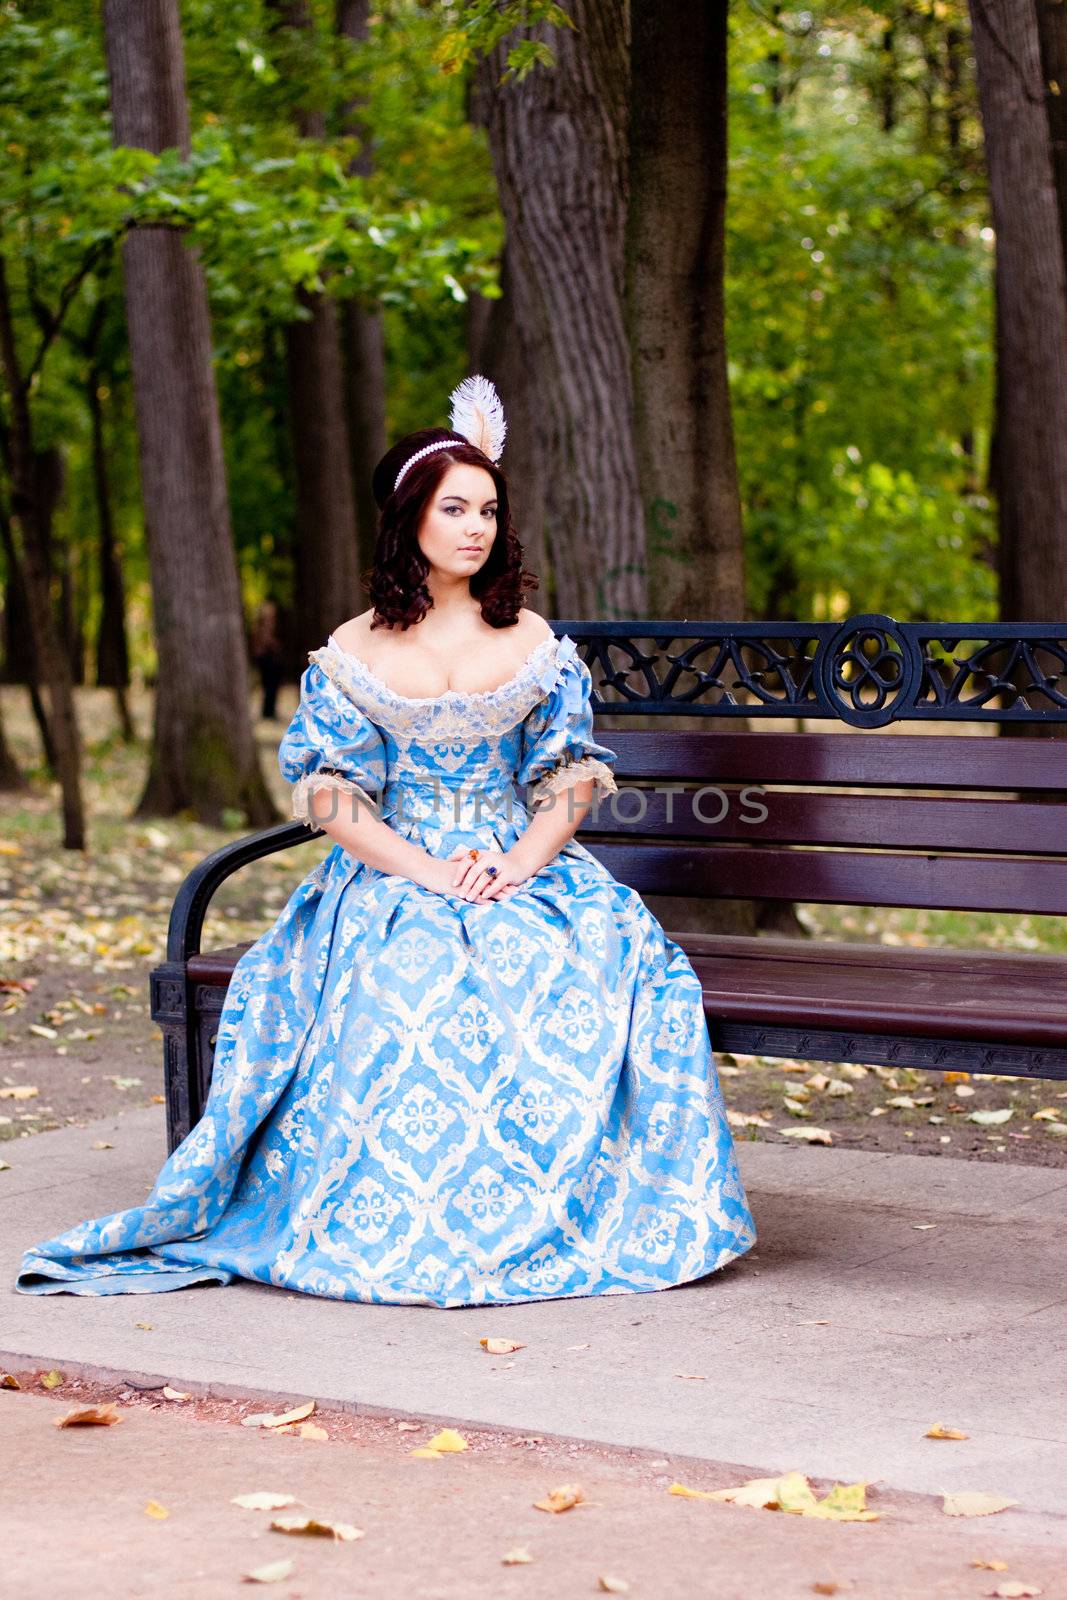 A portrait of lady in a blue baroque dress sitting on bench
